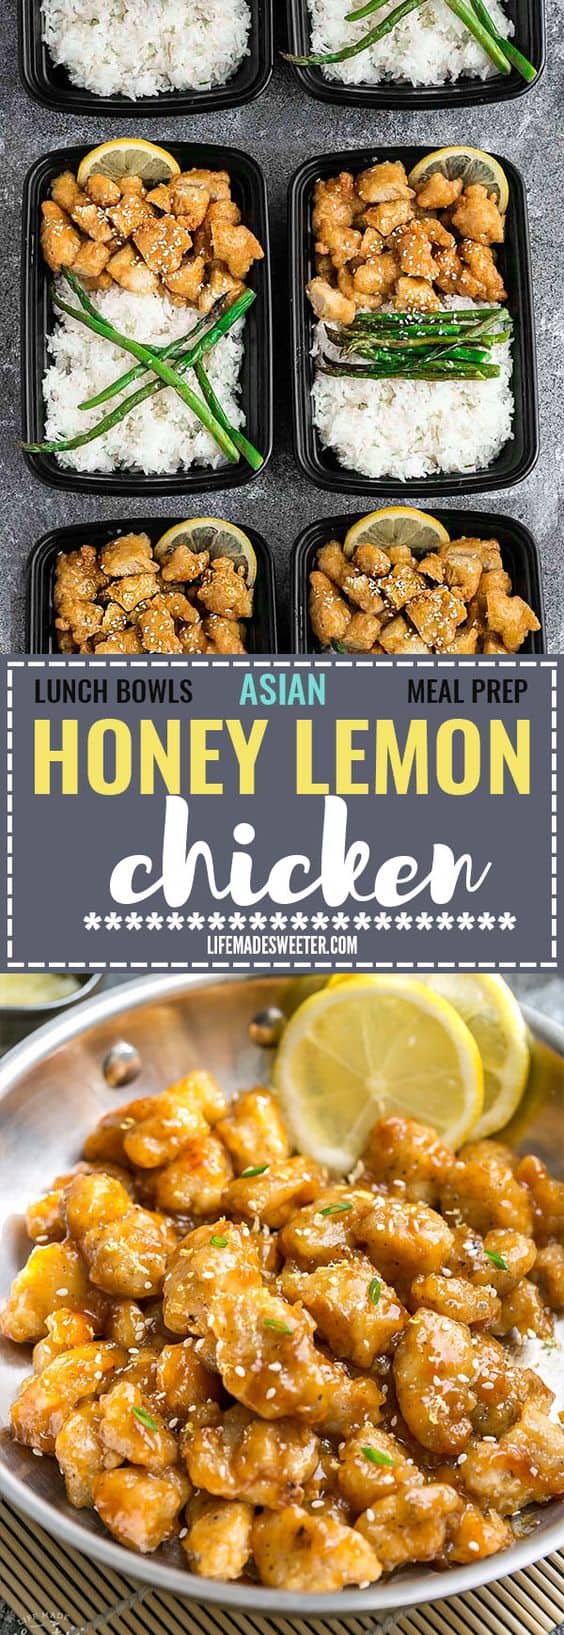 Asian Lemon Chicken -a delicious homemade Chinese Lemon Chicken takeout. Coated in a refreshingly sweet. savory & tangy sauce that is even better than your local Chinese takeout restaurant! Best of all, it's full of authentic flavors and super easy to make with about 10 minutes of prep time. Instructions for pan-frying and baking in the oven.Skip that takeout menu! This is so much better and healthier! Weekly meal prep or leftovers are great for lunch bowls for work or school.